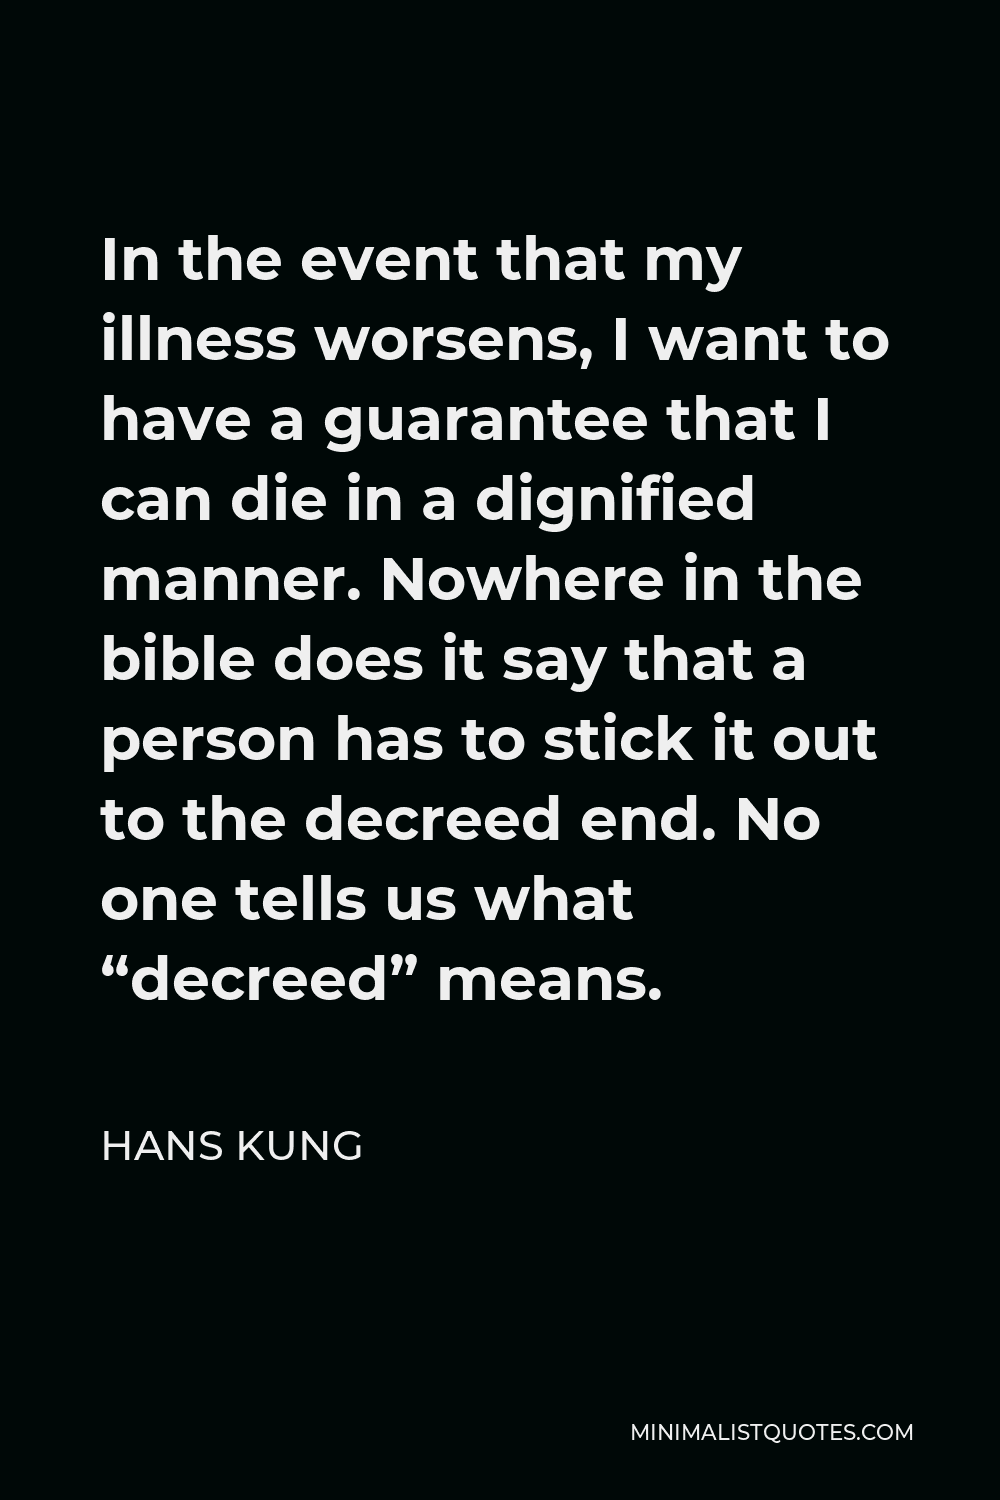 Hans Kung Quote - In the event that my illness worsens, I want to have a guarantee that I can die in a dignified manner. Nowhere in the bible does it say that a person has to stick it out to the decreed end. No one tells us what “decreed” means.